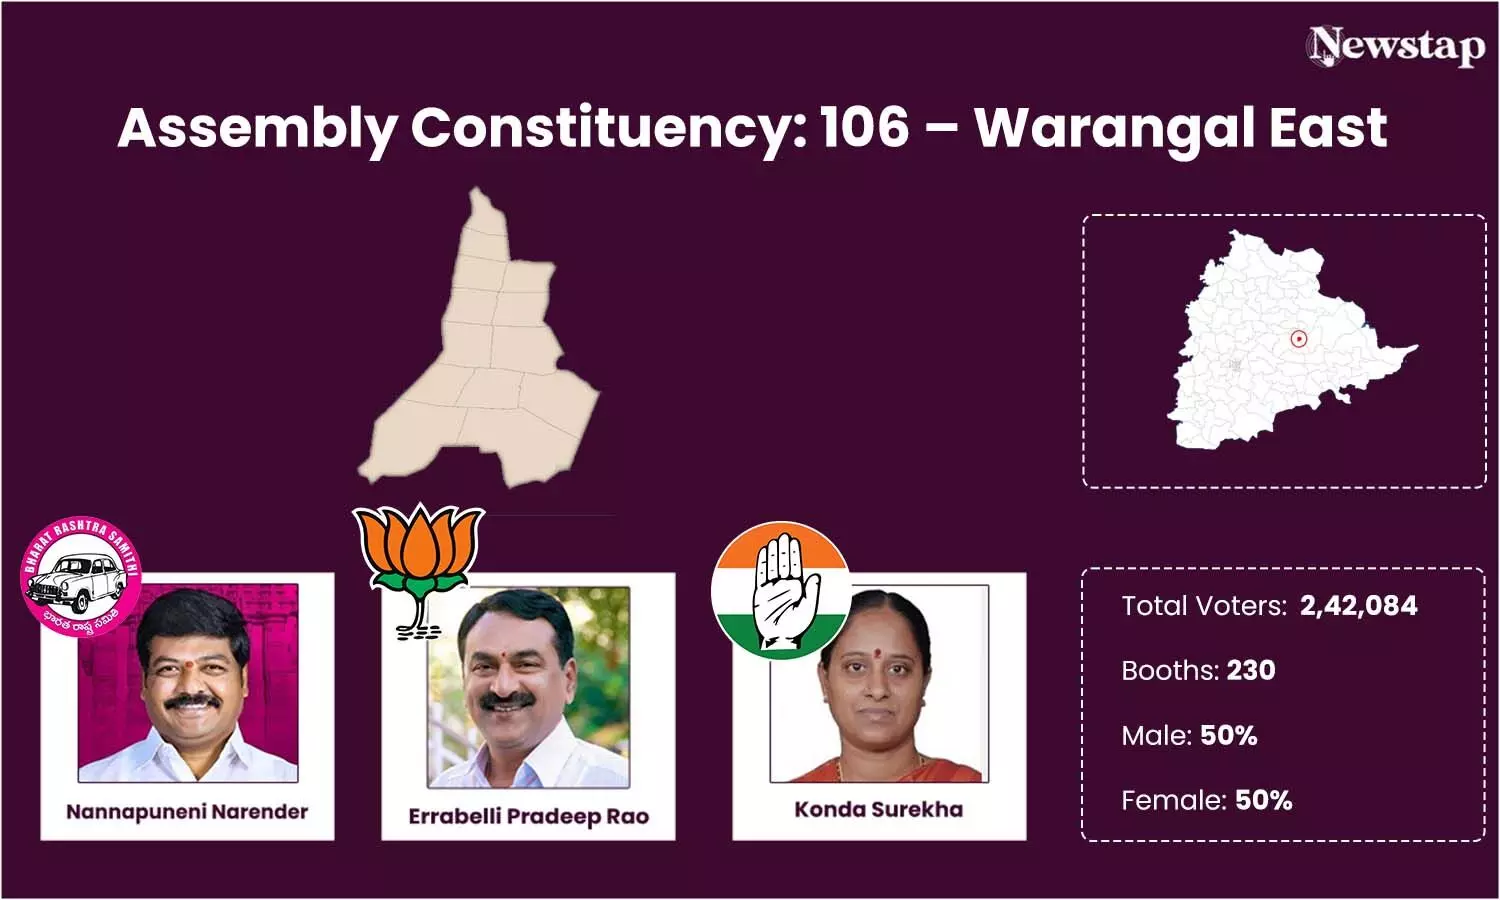 Colleagues not so long ago, BRS, BJP, Congress candidates slug it out in Warangal East